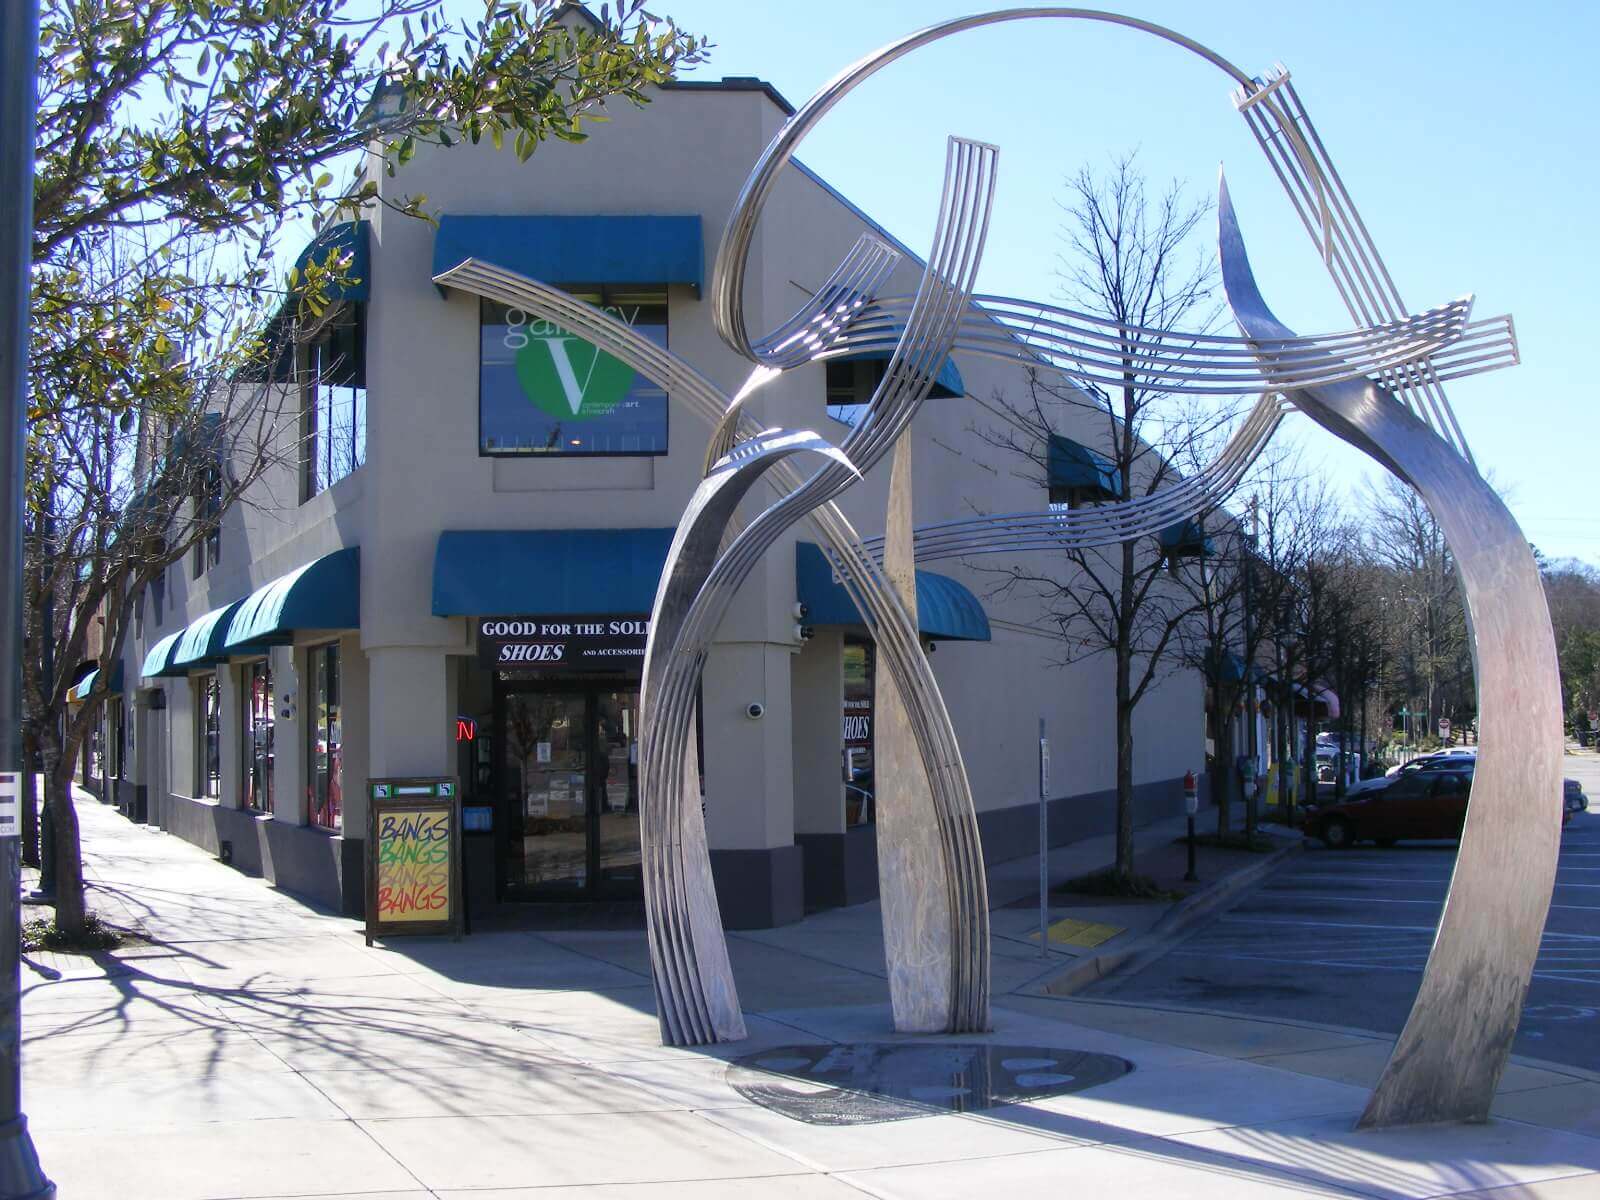 Photograph of a sculpture in Five Points